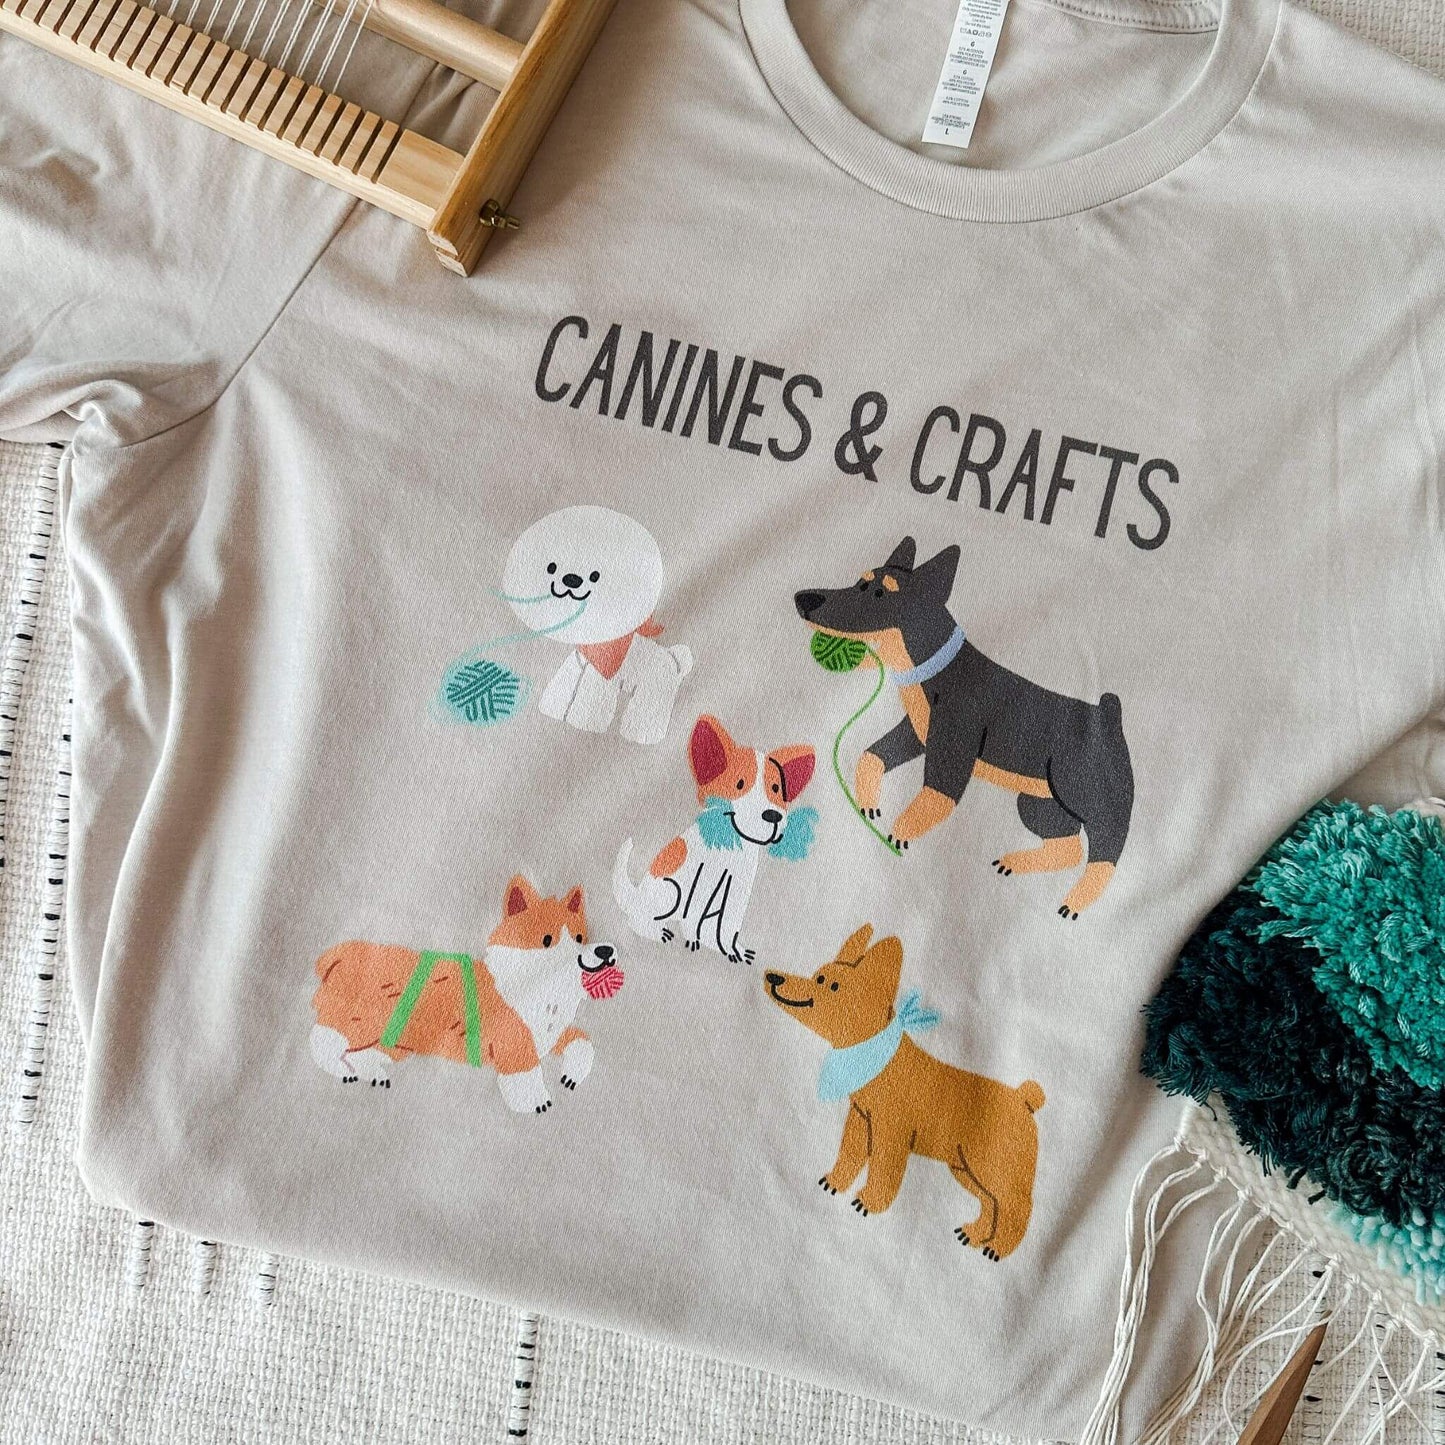 Canines & Crafts T-Shirt